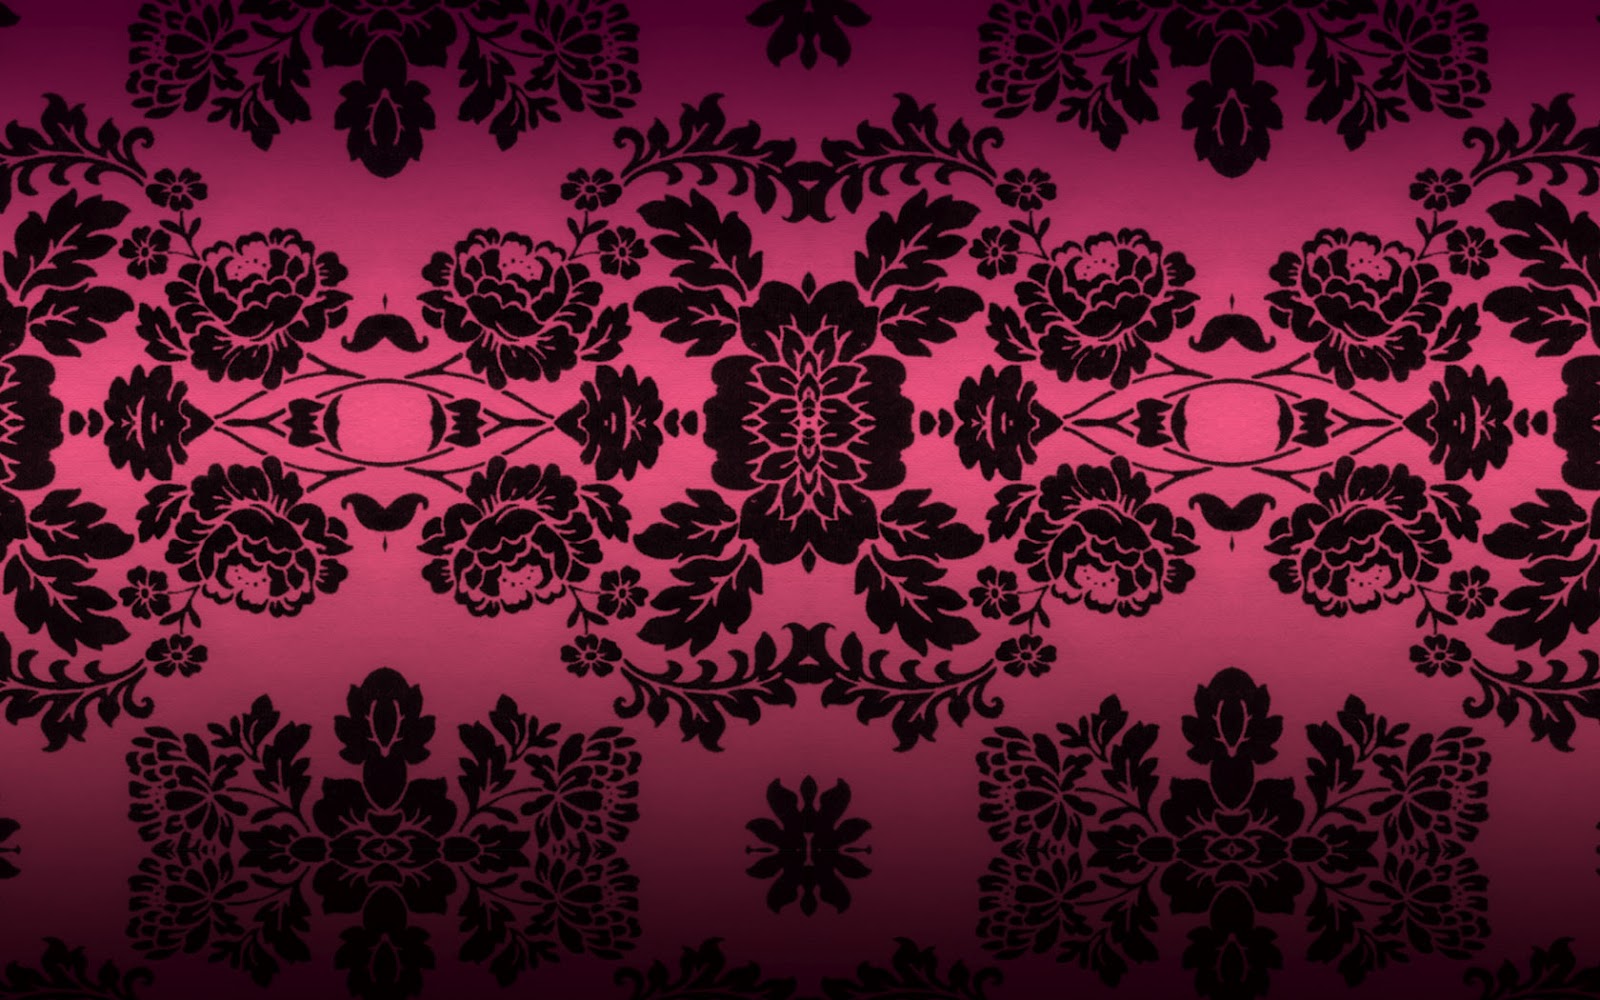  Pink and Black Wallpaper Background by angeldust on this Pink